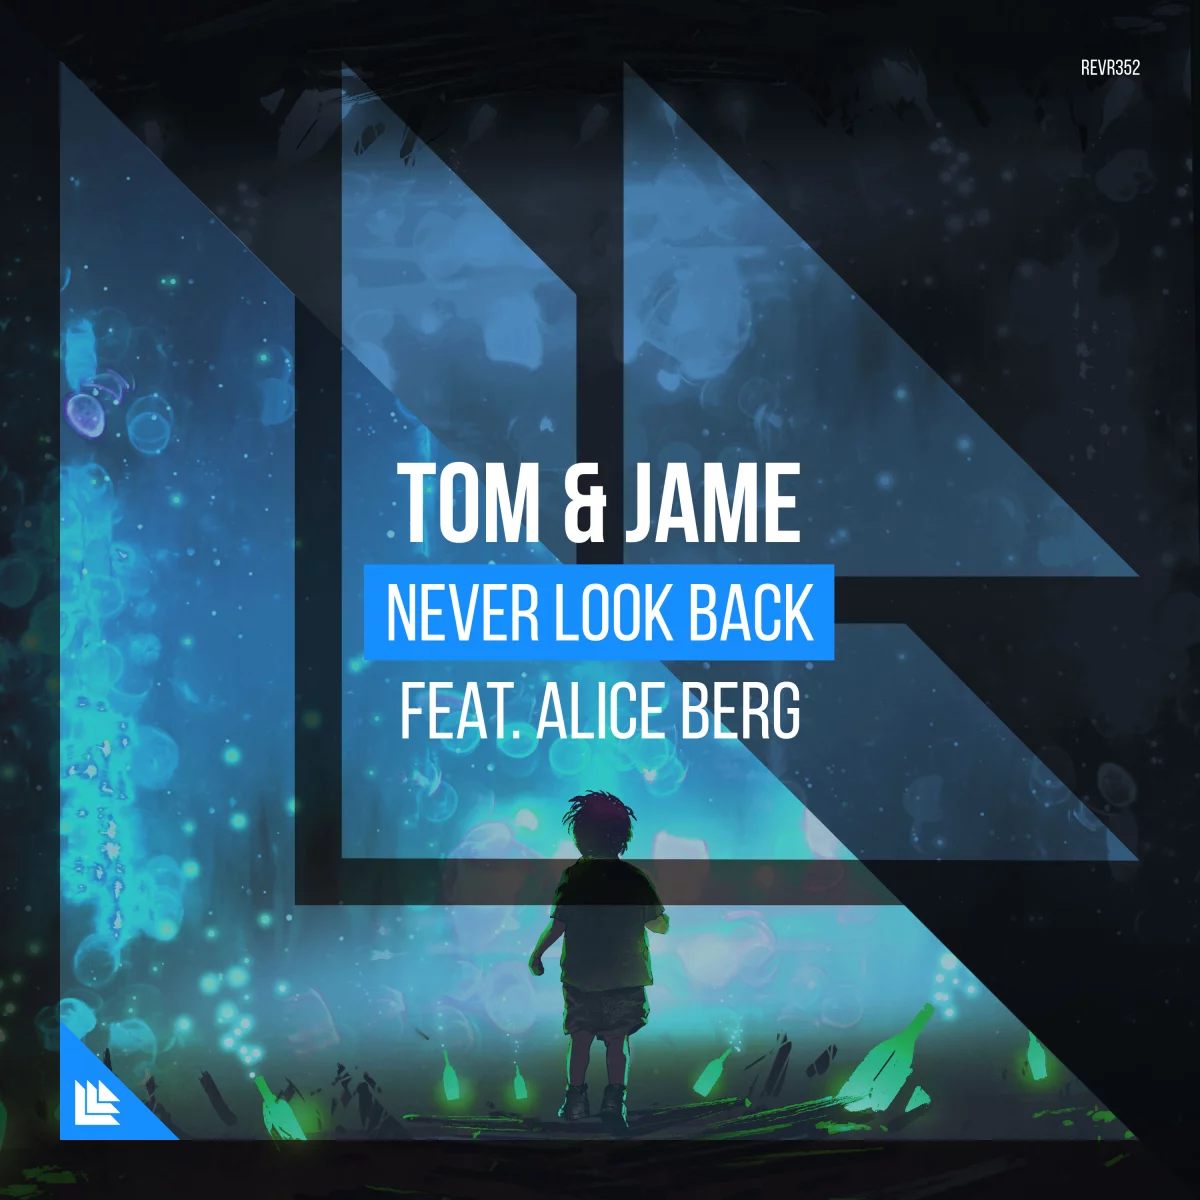 Never Look Back - Tom & Jame⁠ feat. Alice Berg